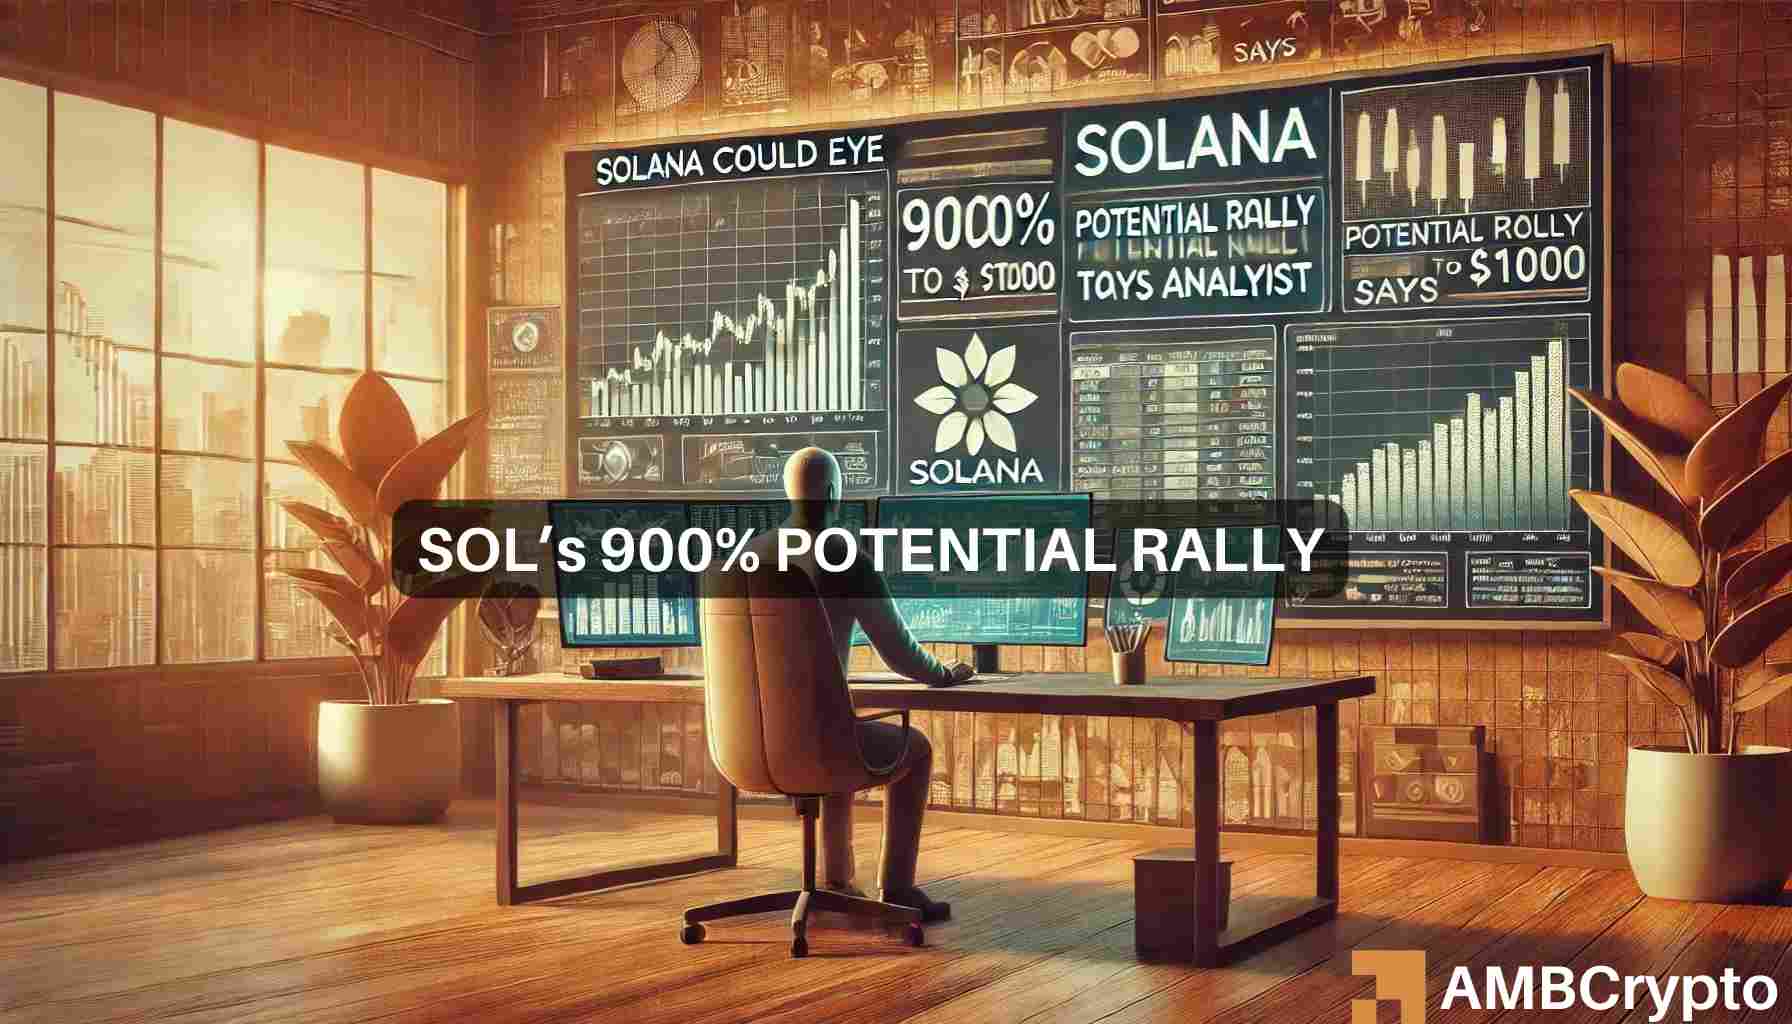 Solana could eye a 900% rally to $1000, but ONLY IF…